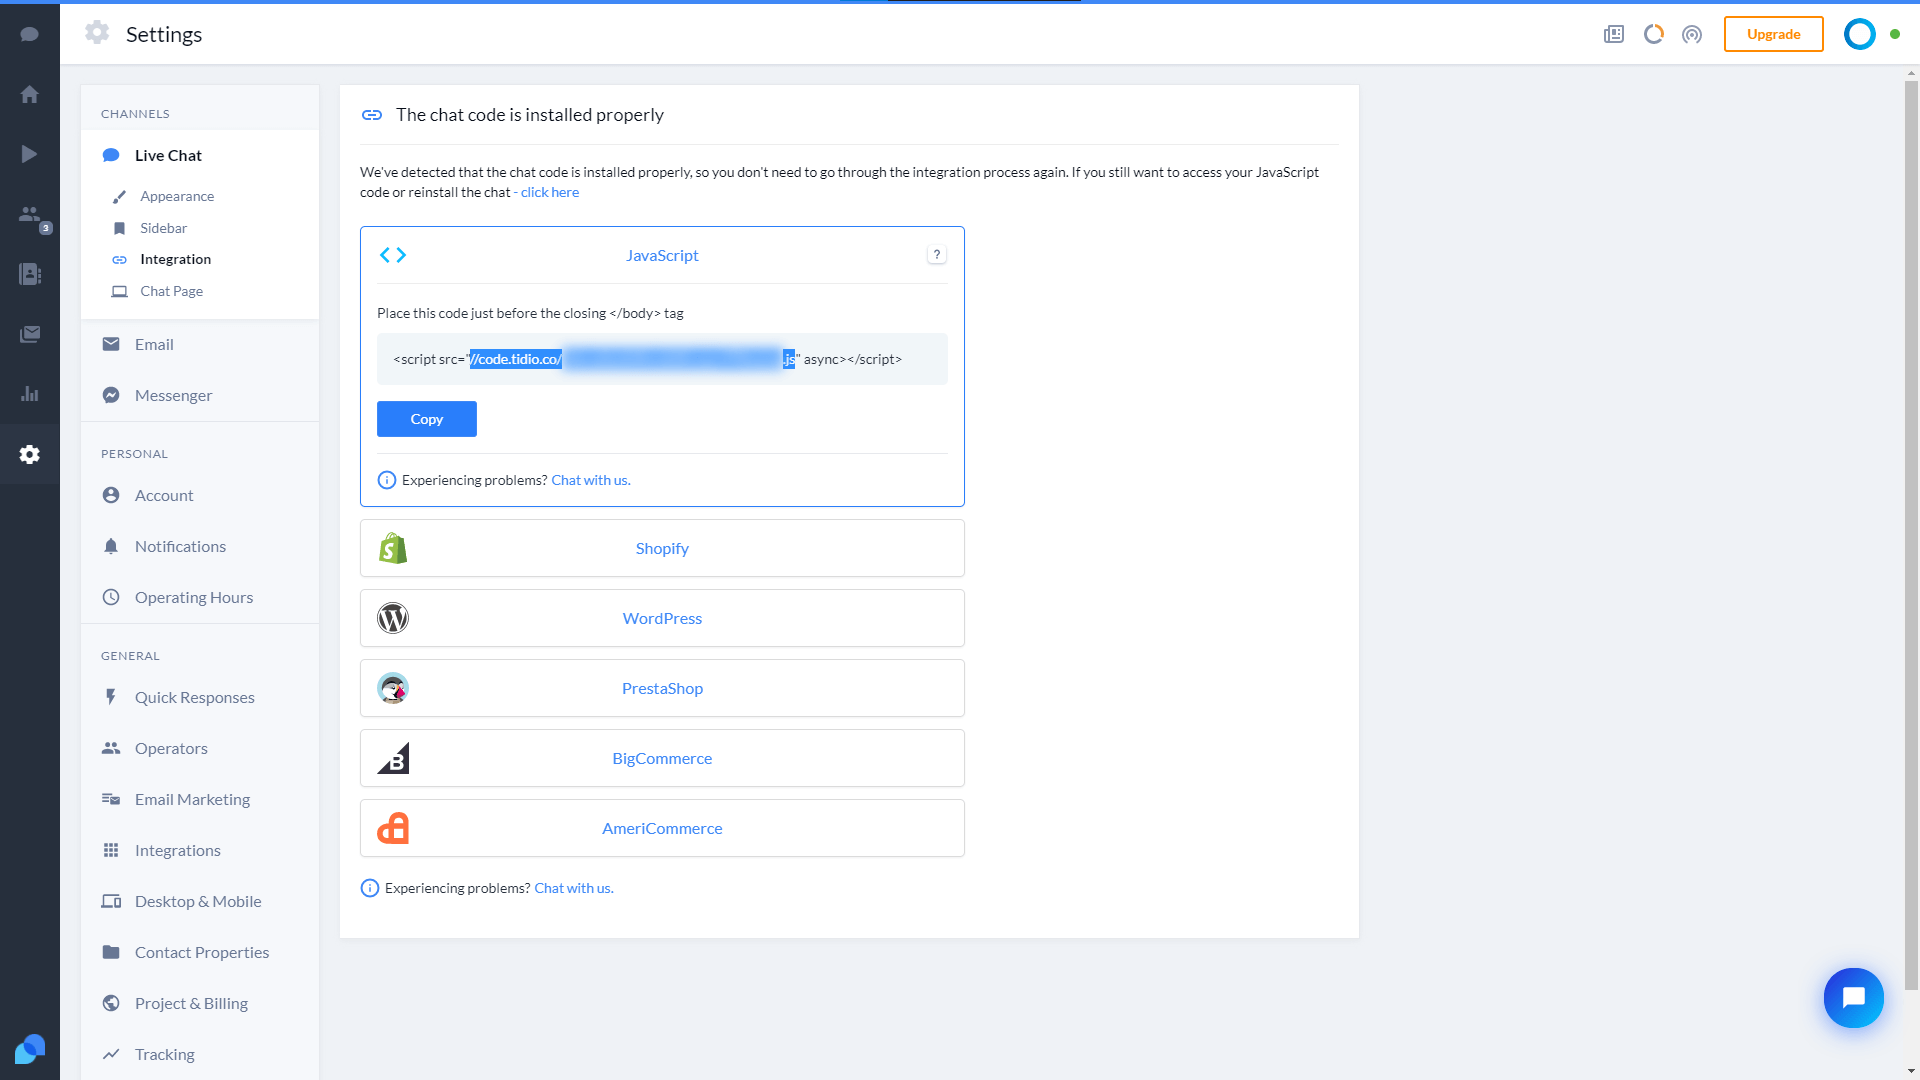 Screenshot of the settings page and the integration url